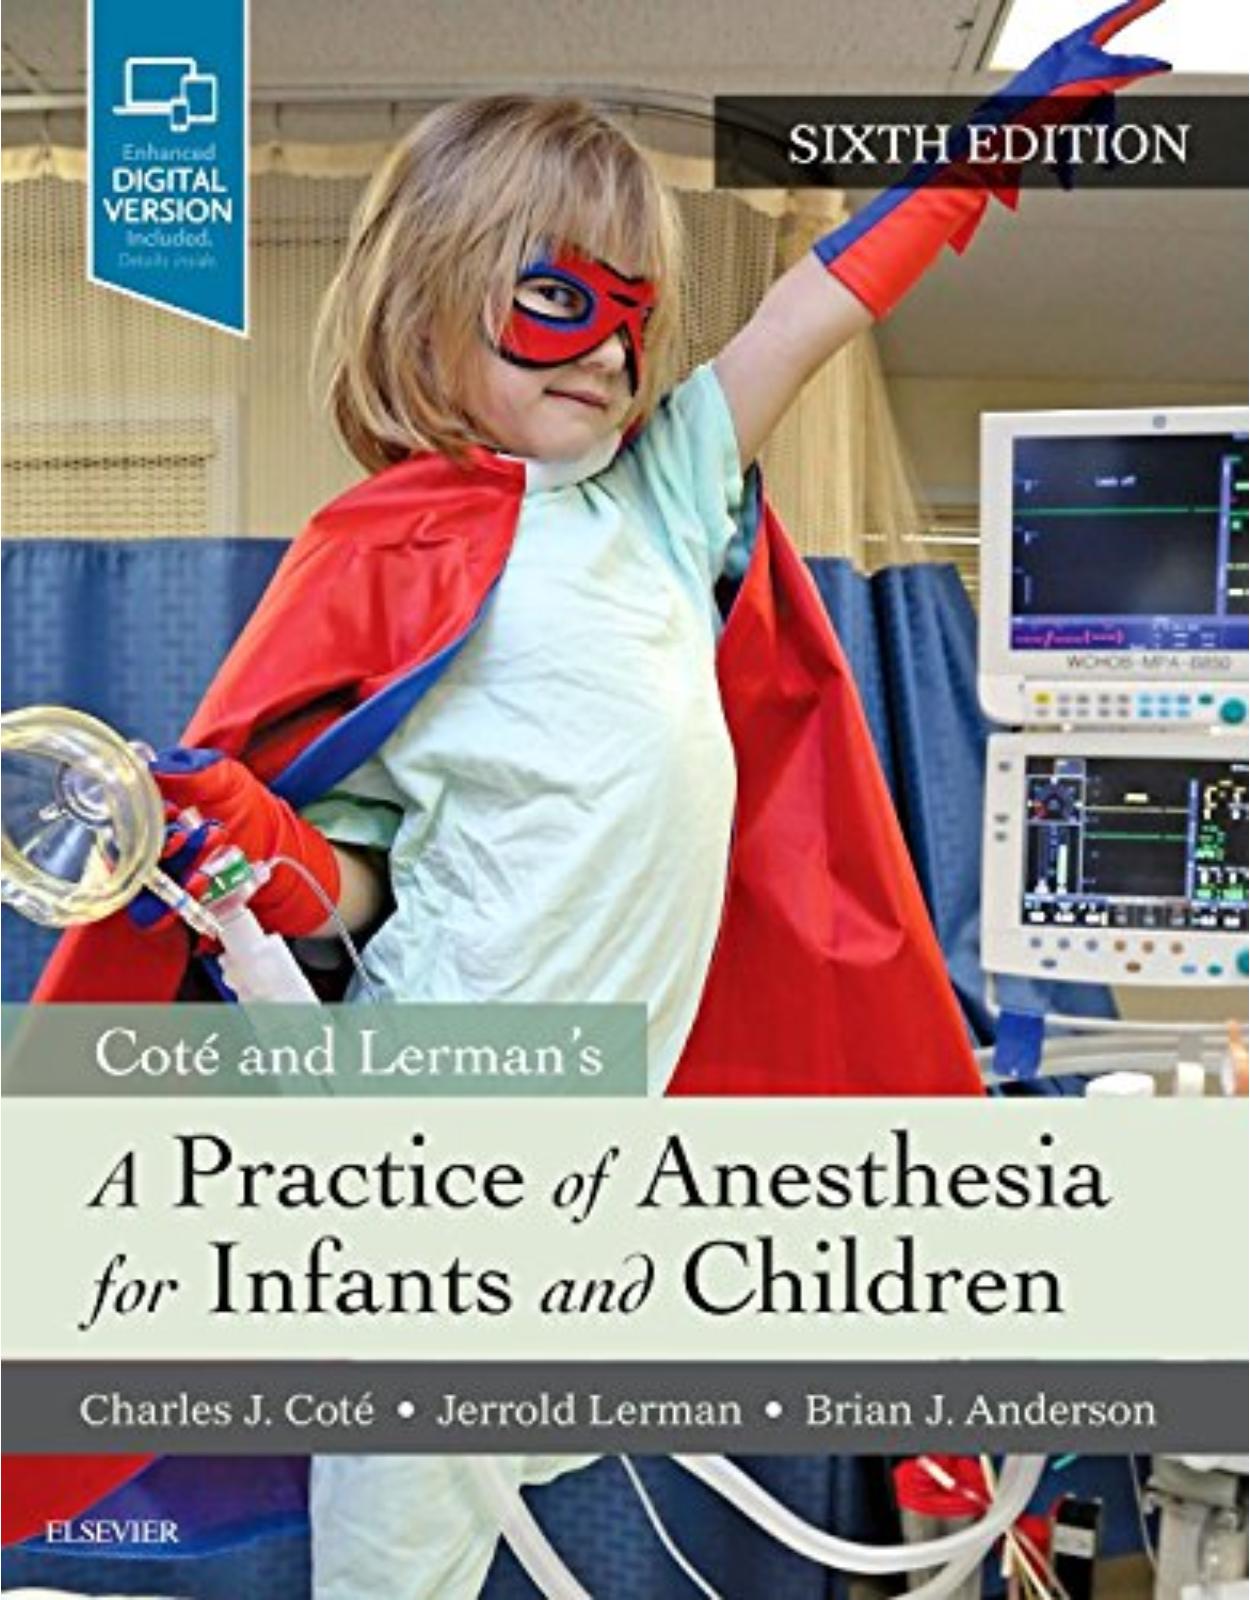 A Practice of Anesthesia for Infants and Children, 6e